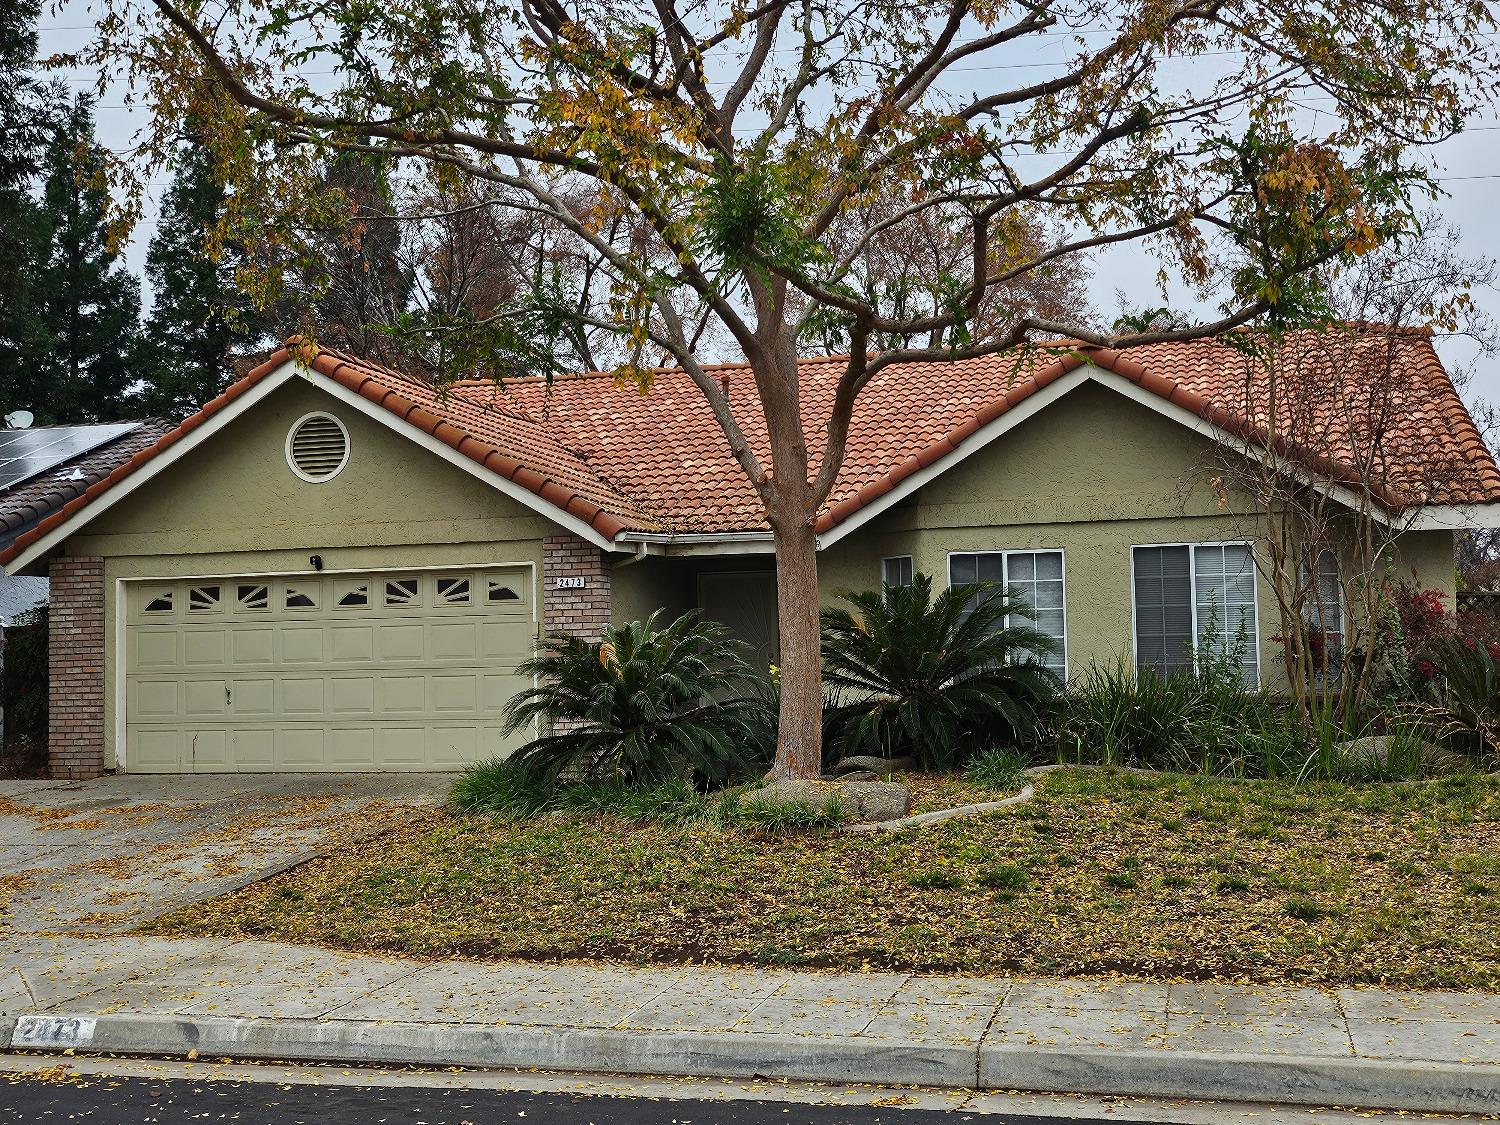 Photo of 2473 Gibson Ave in Clovis, CA